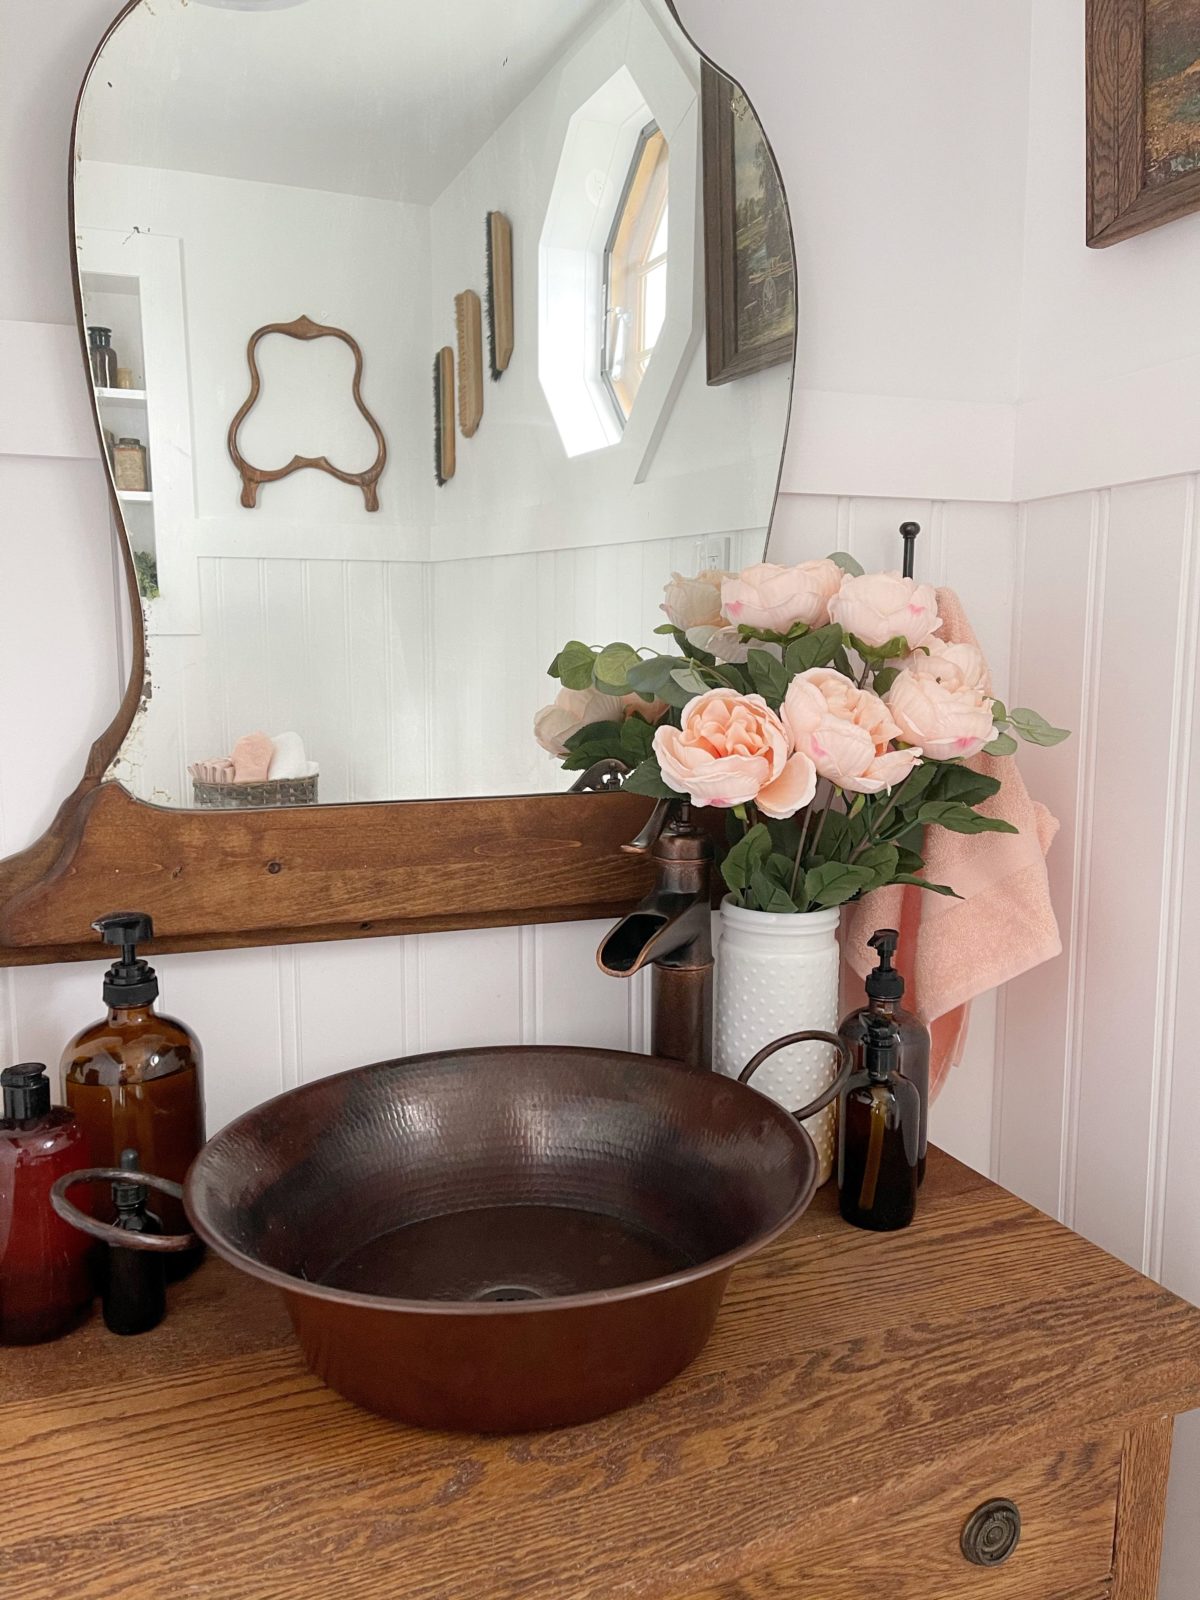 Wait Until You See This Farmhouse Bathroom Remodel